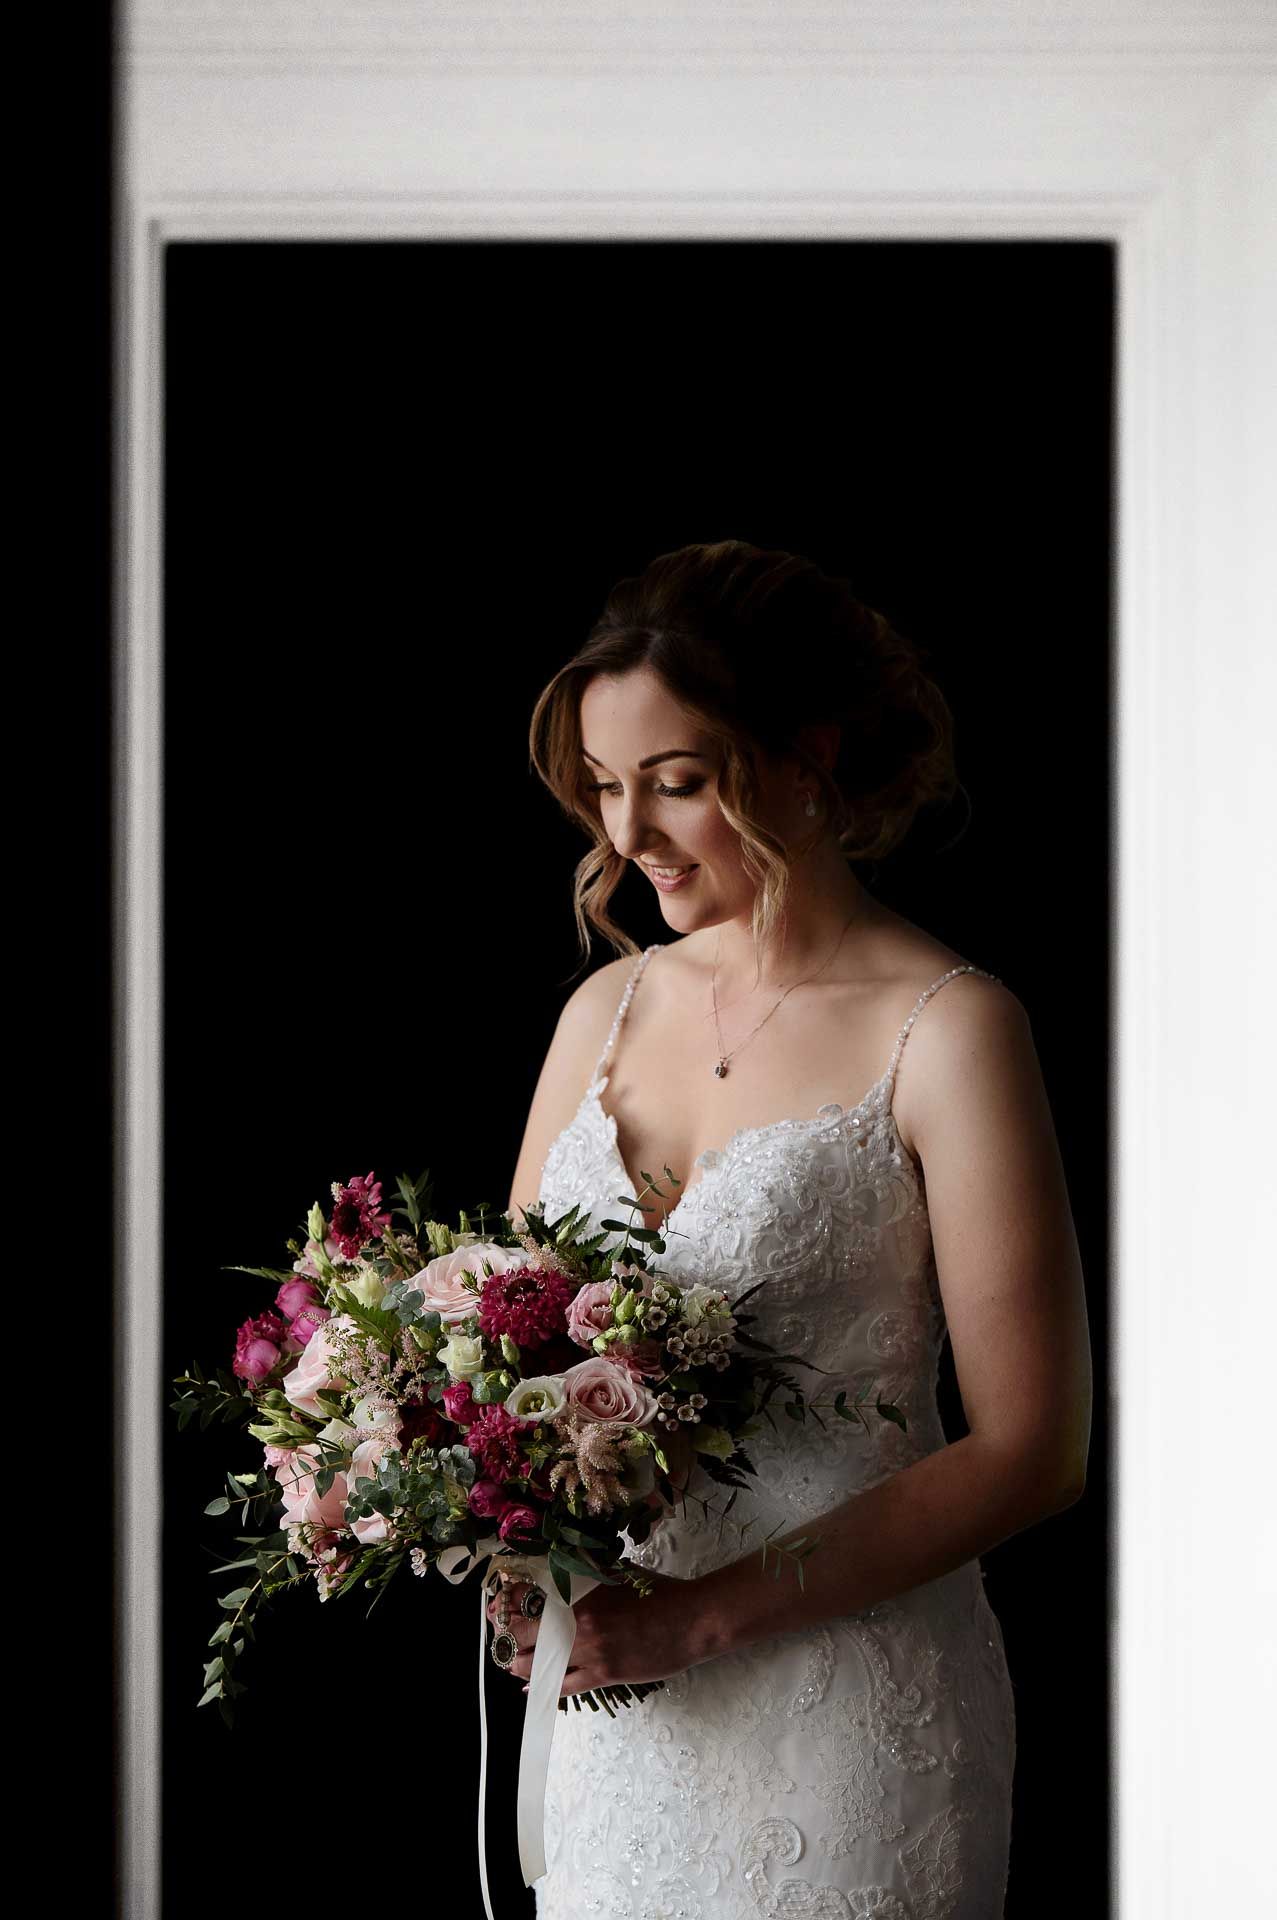 Sophie looking down at her beautiful pink flower bridal bouquet in her wedding dress. Photography by Fountain Photography. Videography by Veiled Productions.